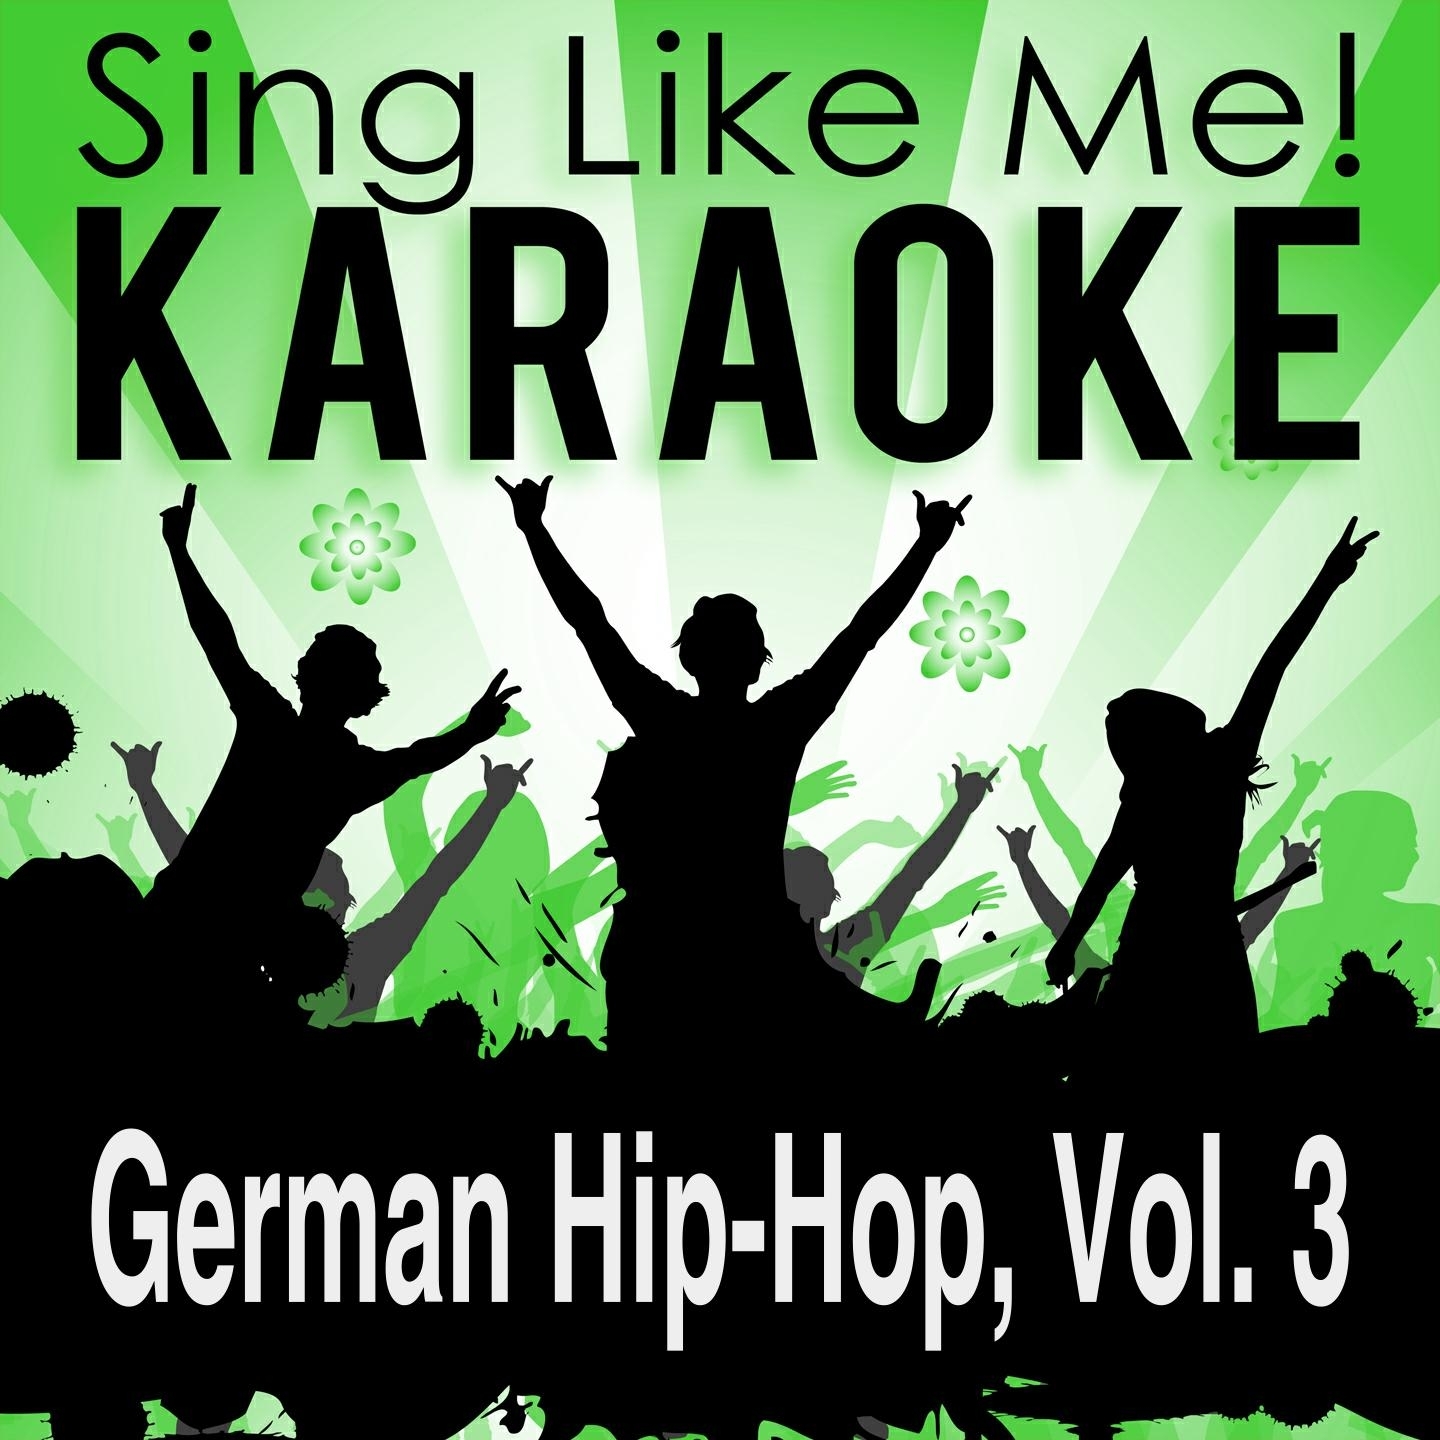 YMCA Karaoke Version With Guide Melody Originally Performed By Touche  Krayzee